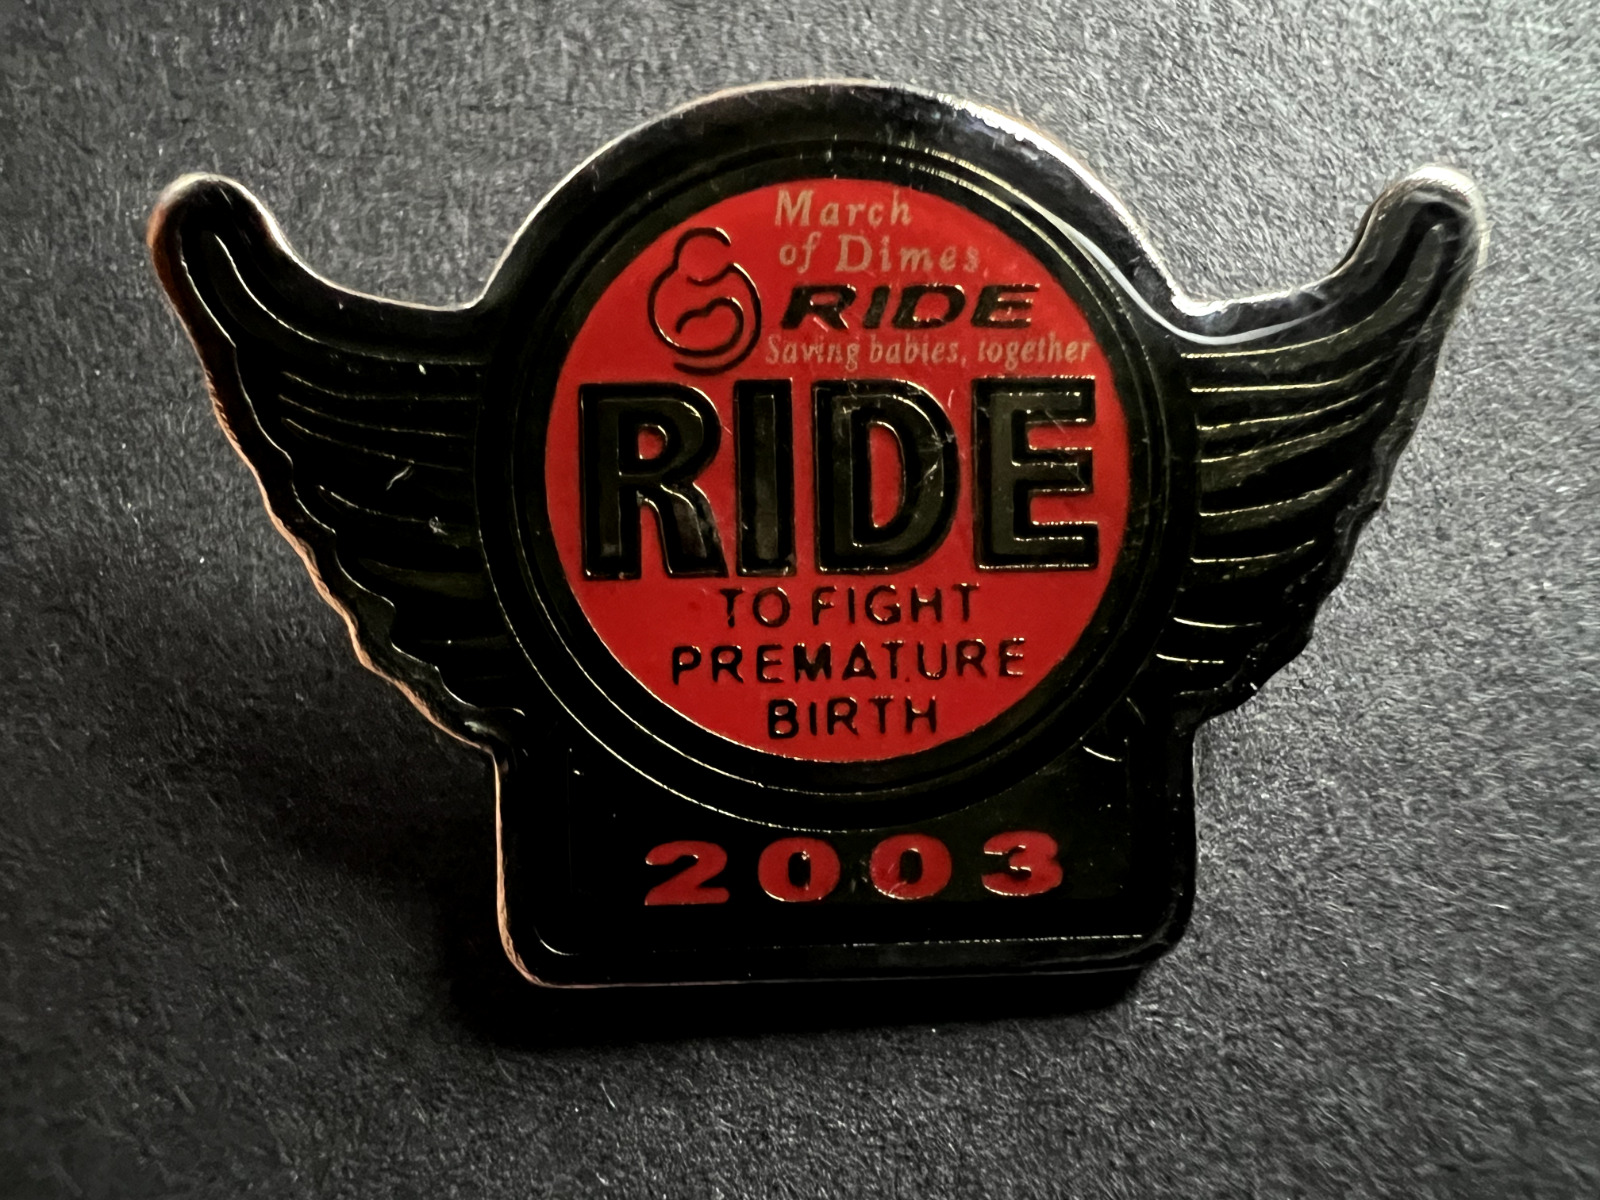 2003 March of Dimes Ride Fight Premature Birth - Motorcycle Jacket Vest Pin